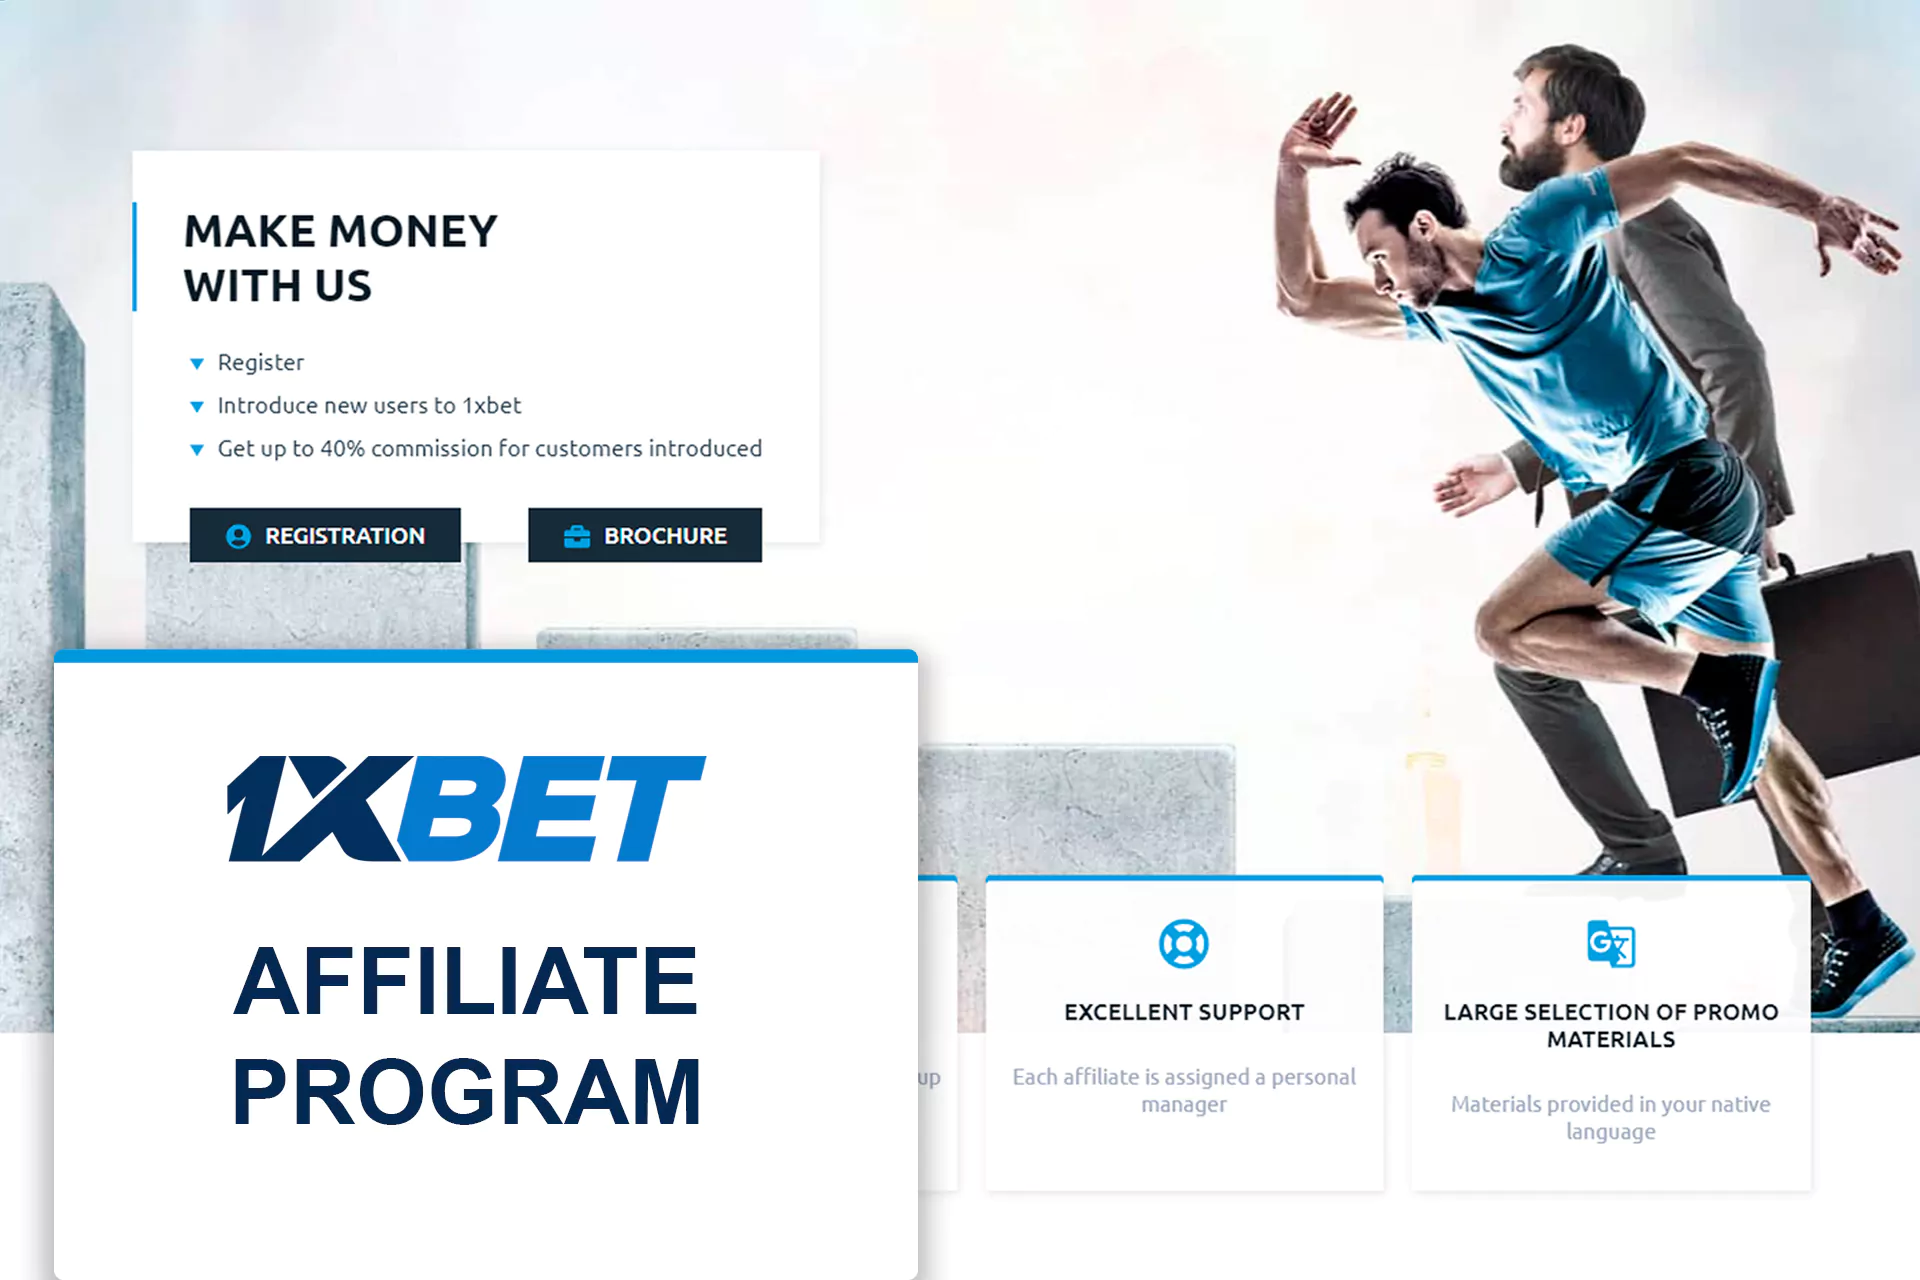 Join the 1xBet affiliate program and earn rewards.